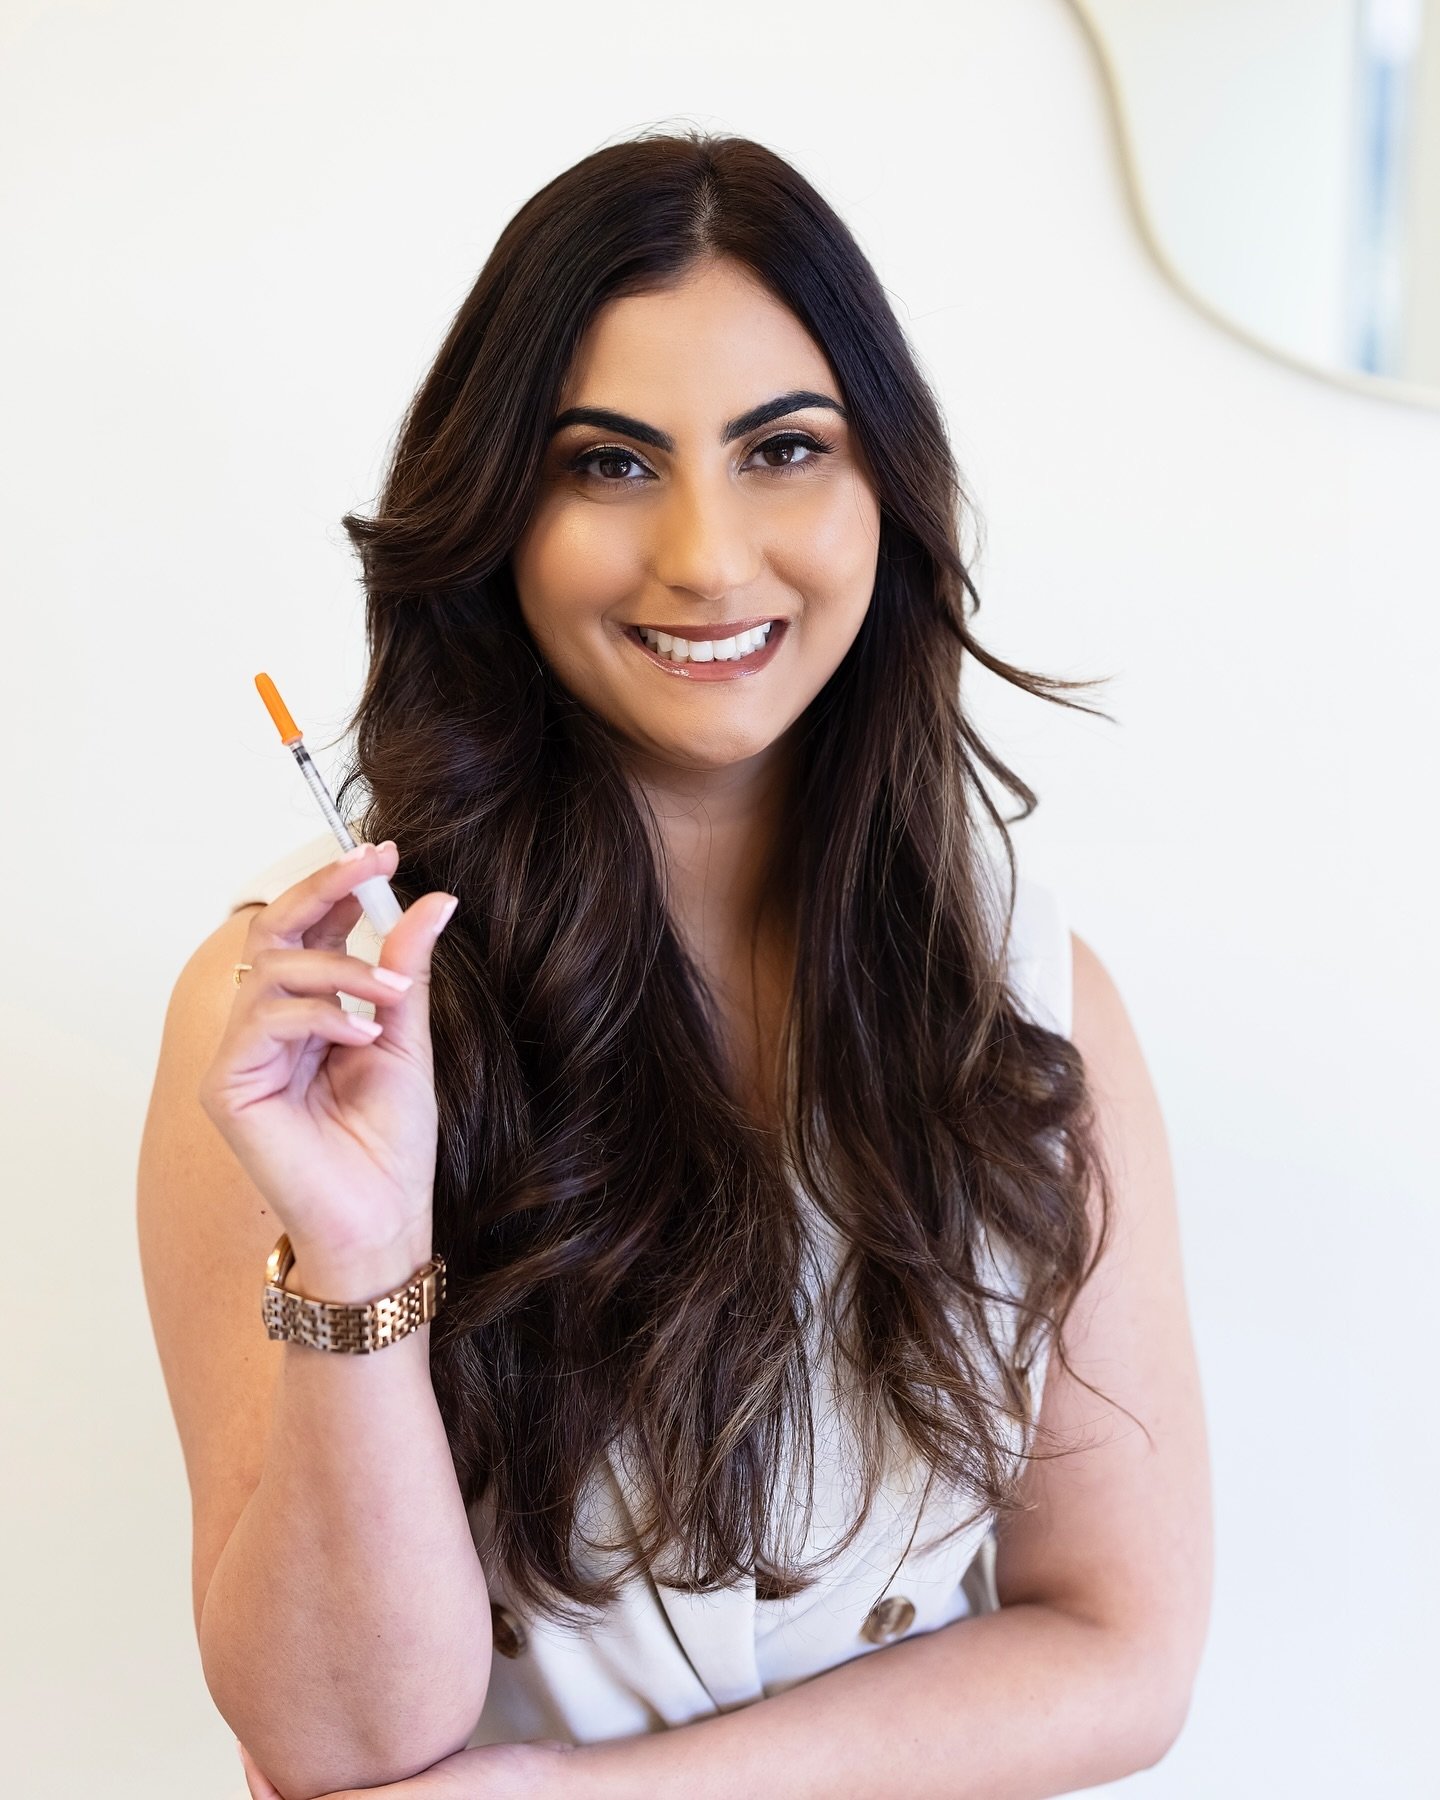 ✨ Meet Jagmit &ldquo;Preeti&rdquo; Kaur ✨

The owner of Skin.Restored immigrated to the US from India and has always been passionate about helping others feel good about themselves. She became a nurse practitioner and now uses her experience to help 